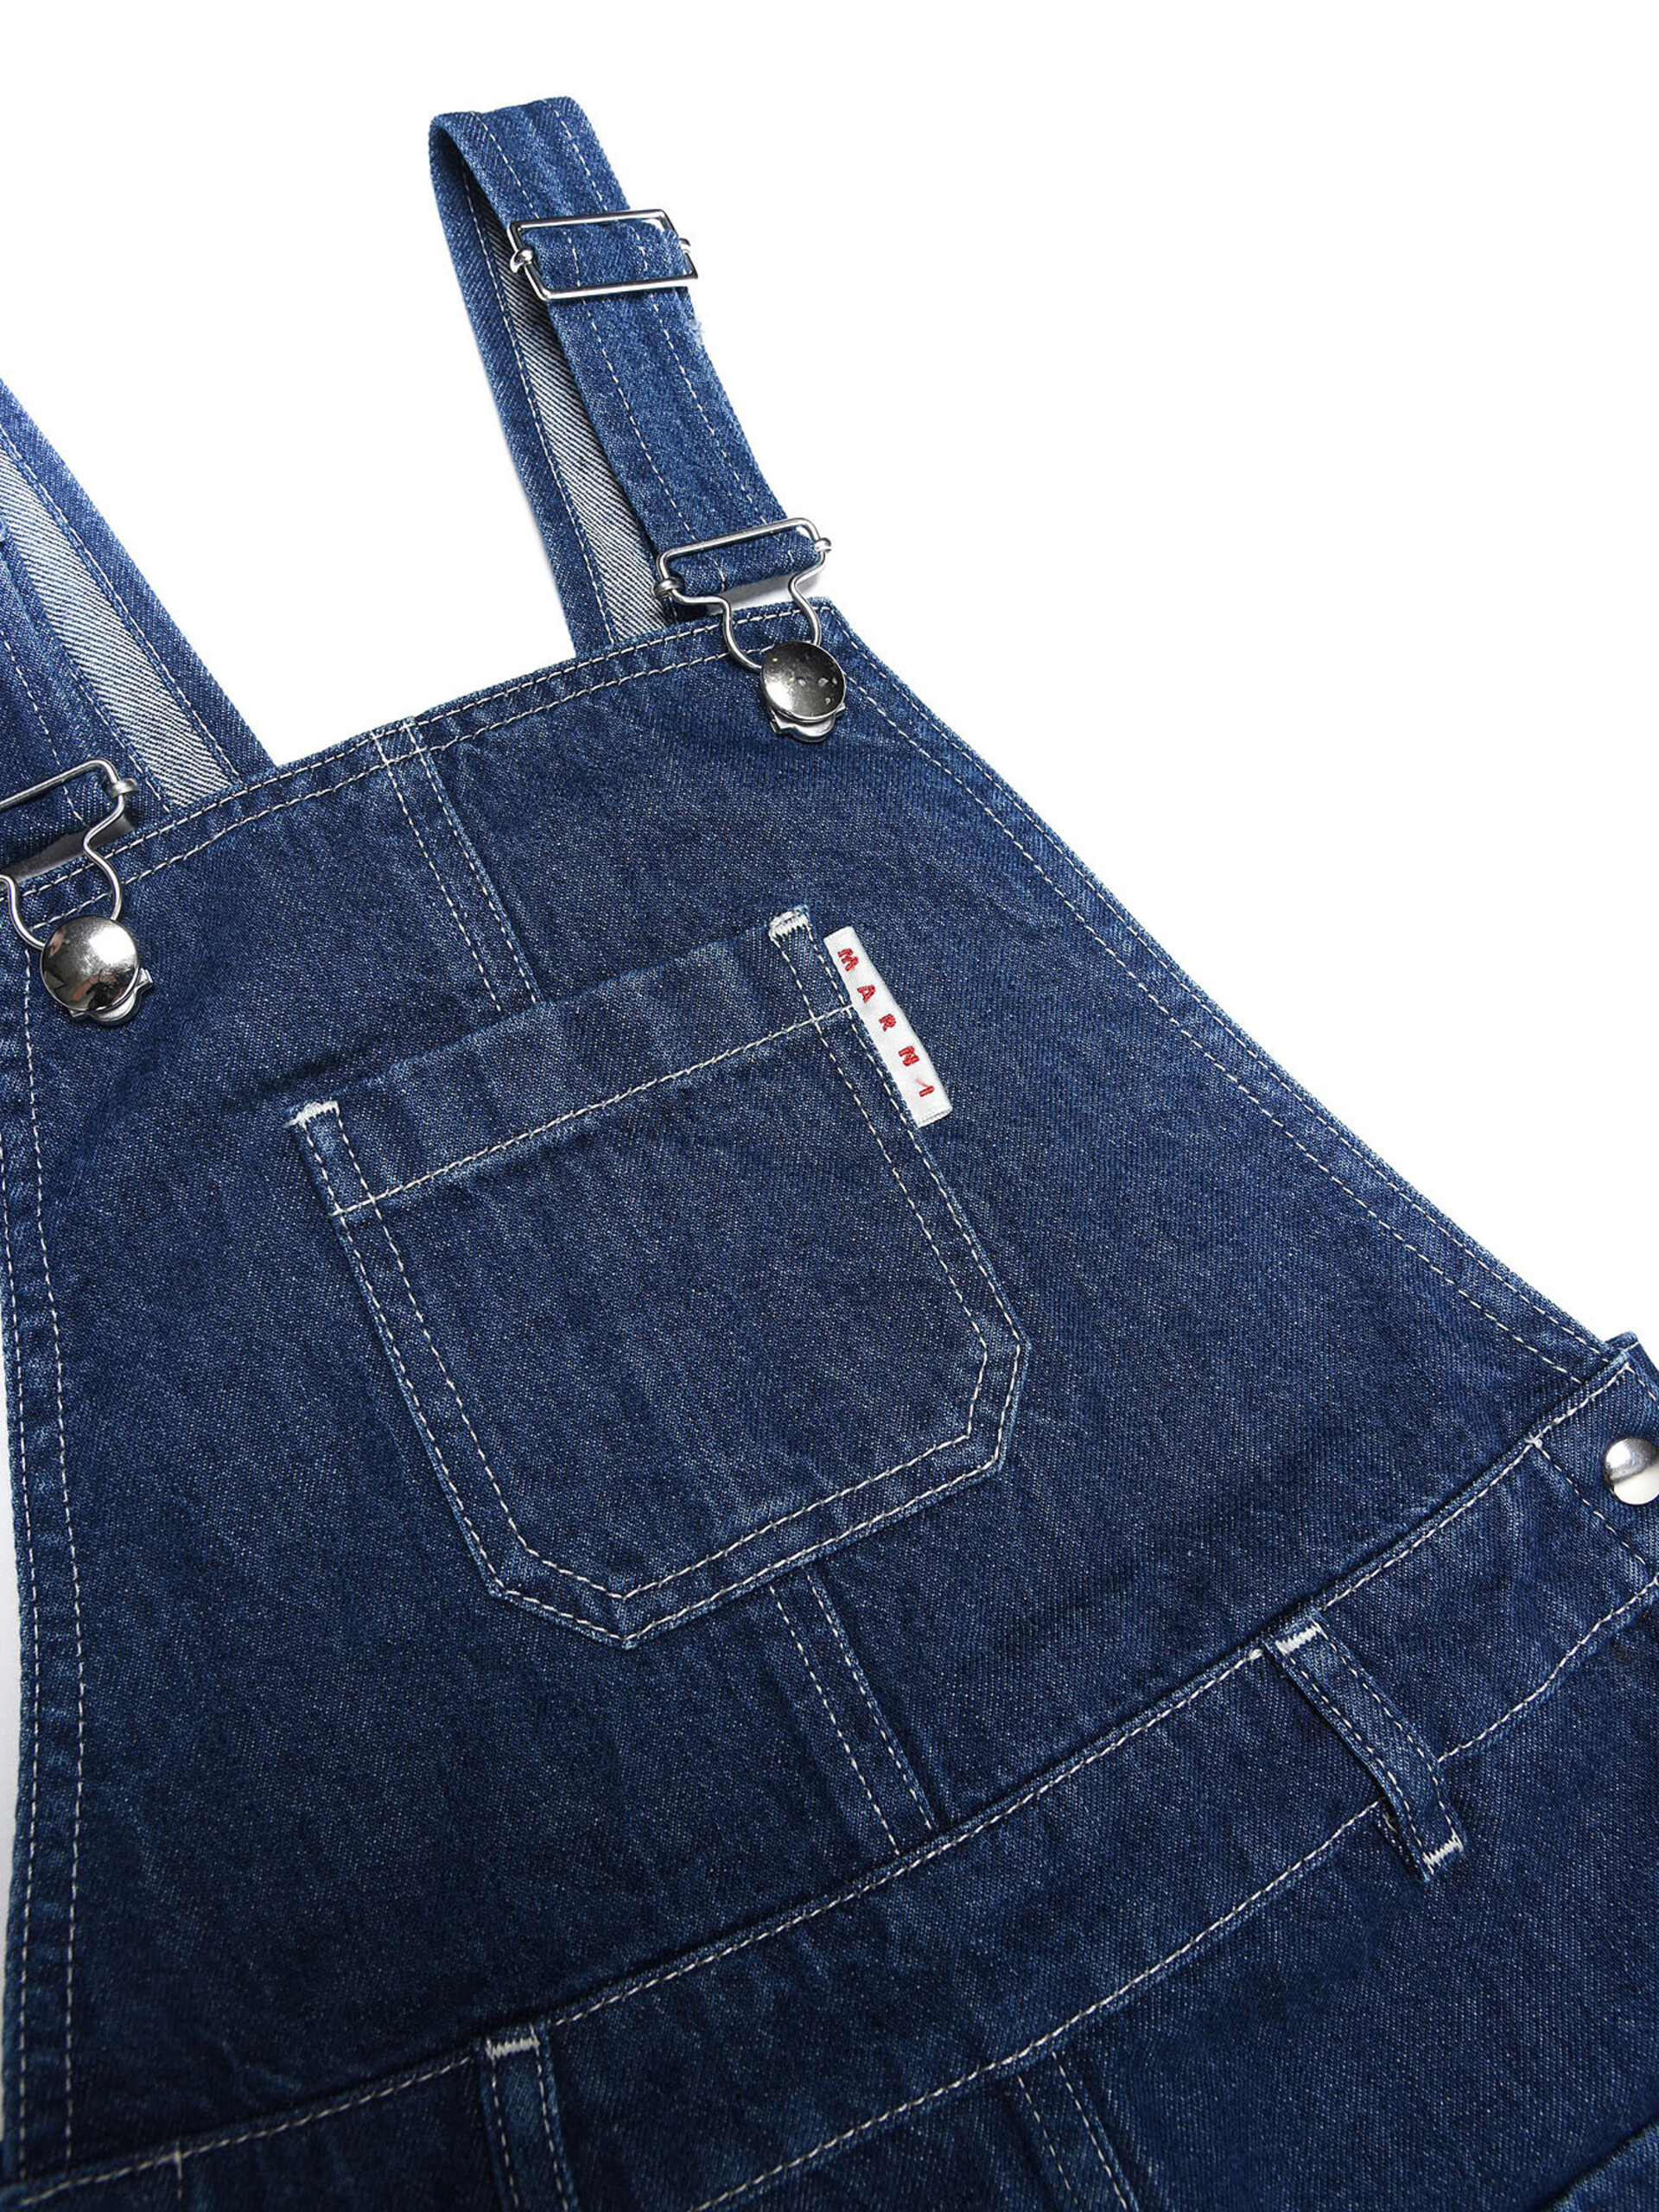 Denim pinafore dress with frayed "M" patch - Dresses - Image 3